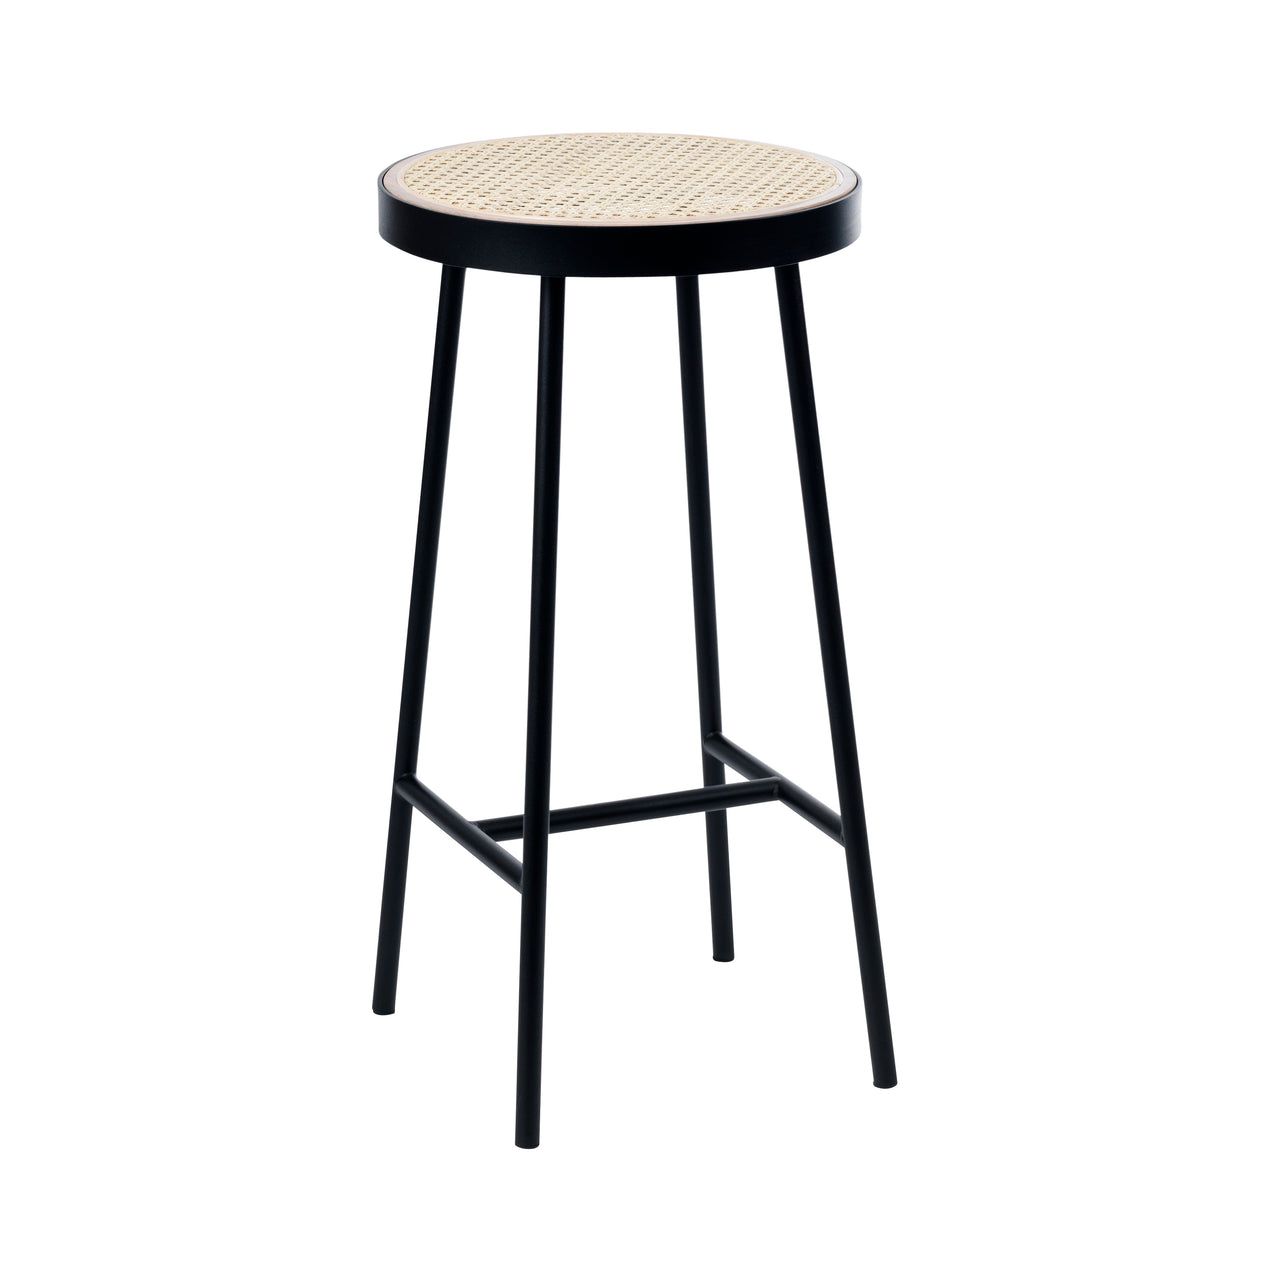 Be My Guest Bar Stool